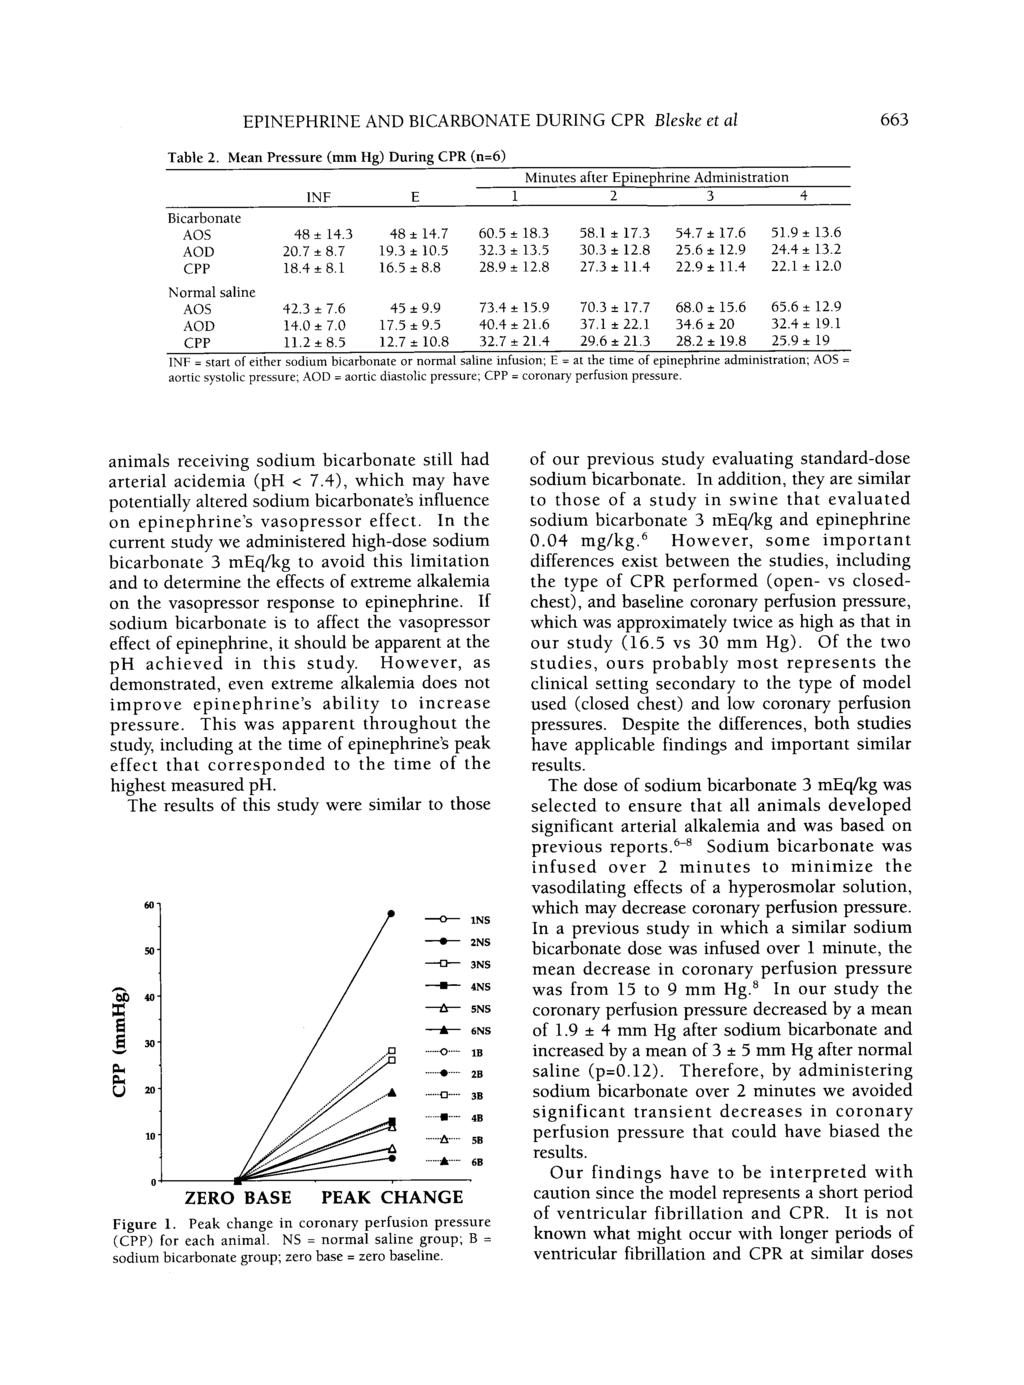 EPINEPHRINE AND BICARBONATE DURING CPR Bleshe et al 663 Table 2. Mean Pressure (mm Hg) During CPR (n=6) Minutes after Epinephrine Administration INF E 1 2 3 4 Bicarbonate AOS 48 f 14.3 48 +- 14.7 60.